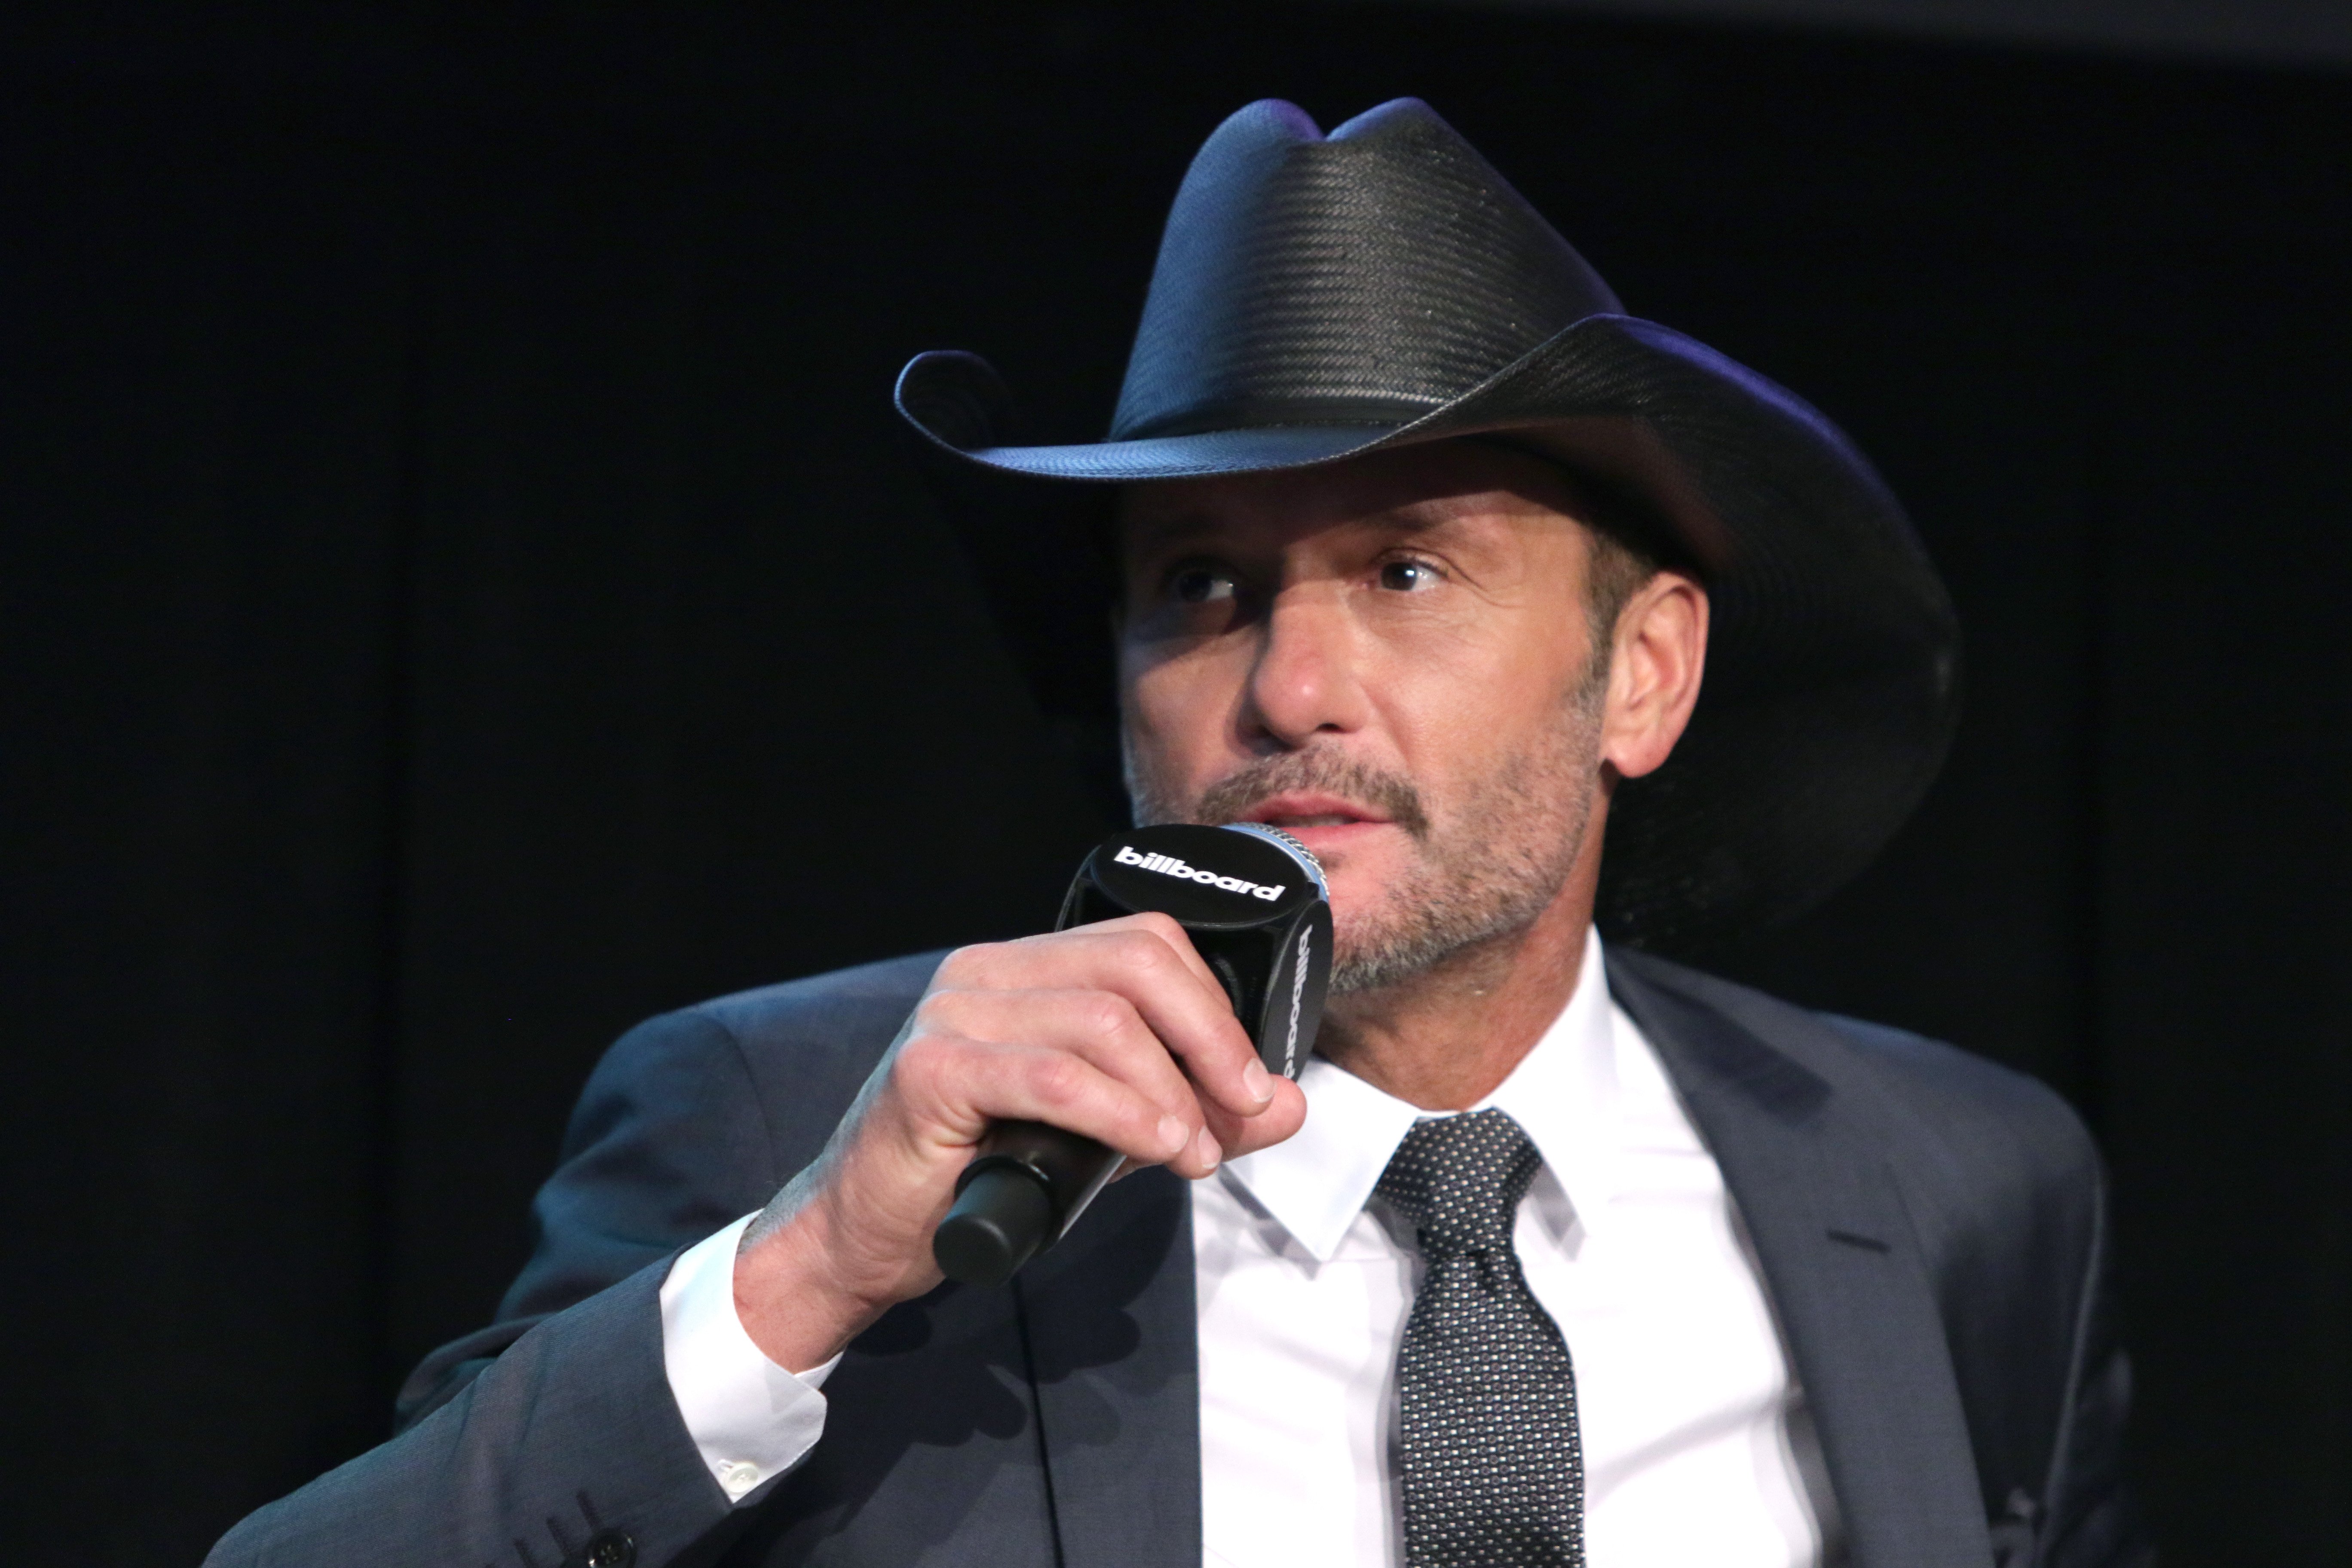 Tim McGraw during the Billboard 2017 Touring Conference - Legends Of Live: Tim McGraw And Faith Hills on November 14, 2017. | Photo: GettyImages